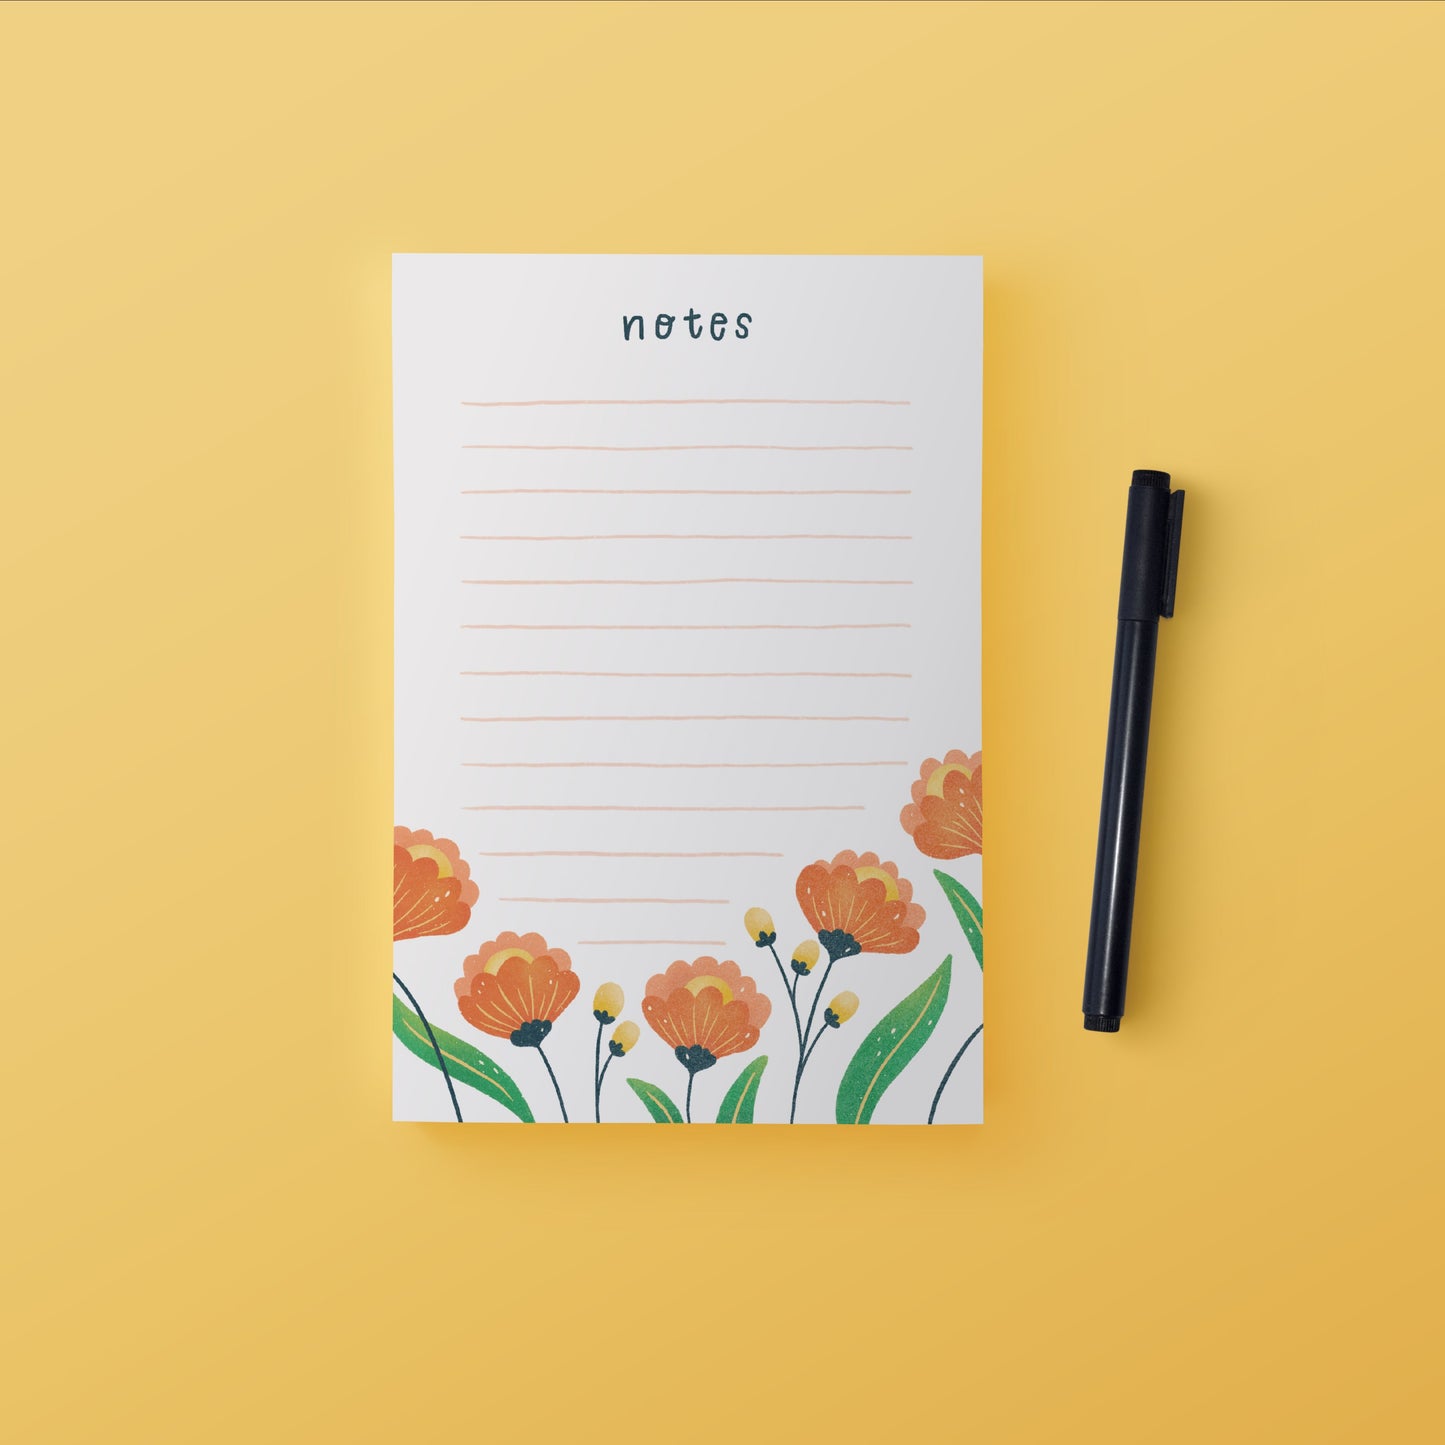 Floral Notes Lined Notepad